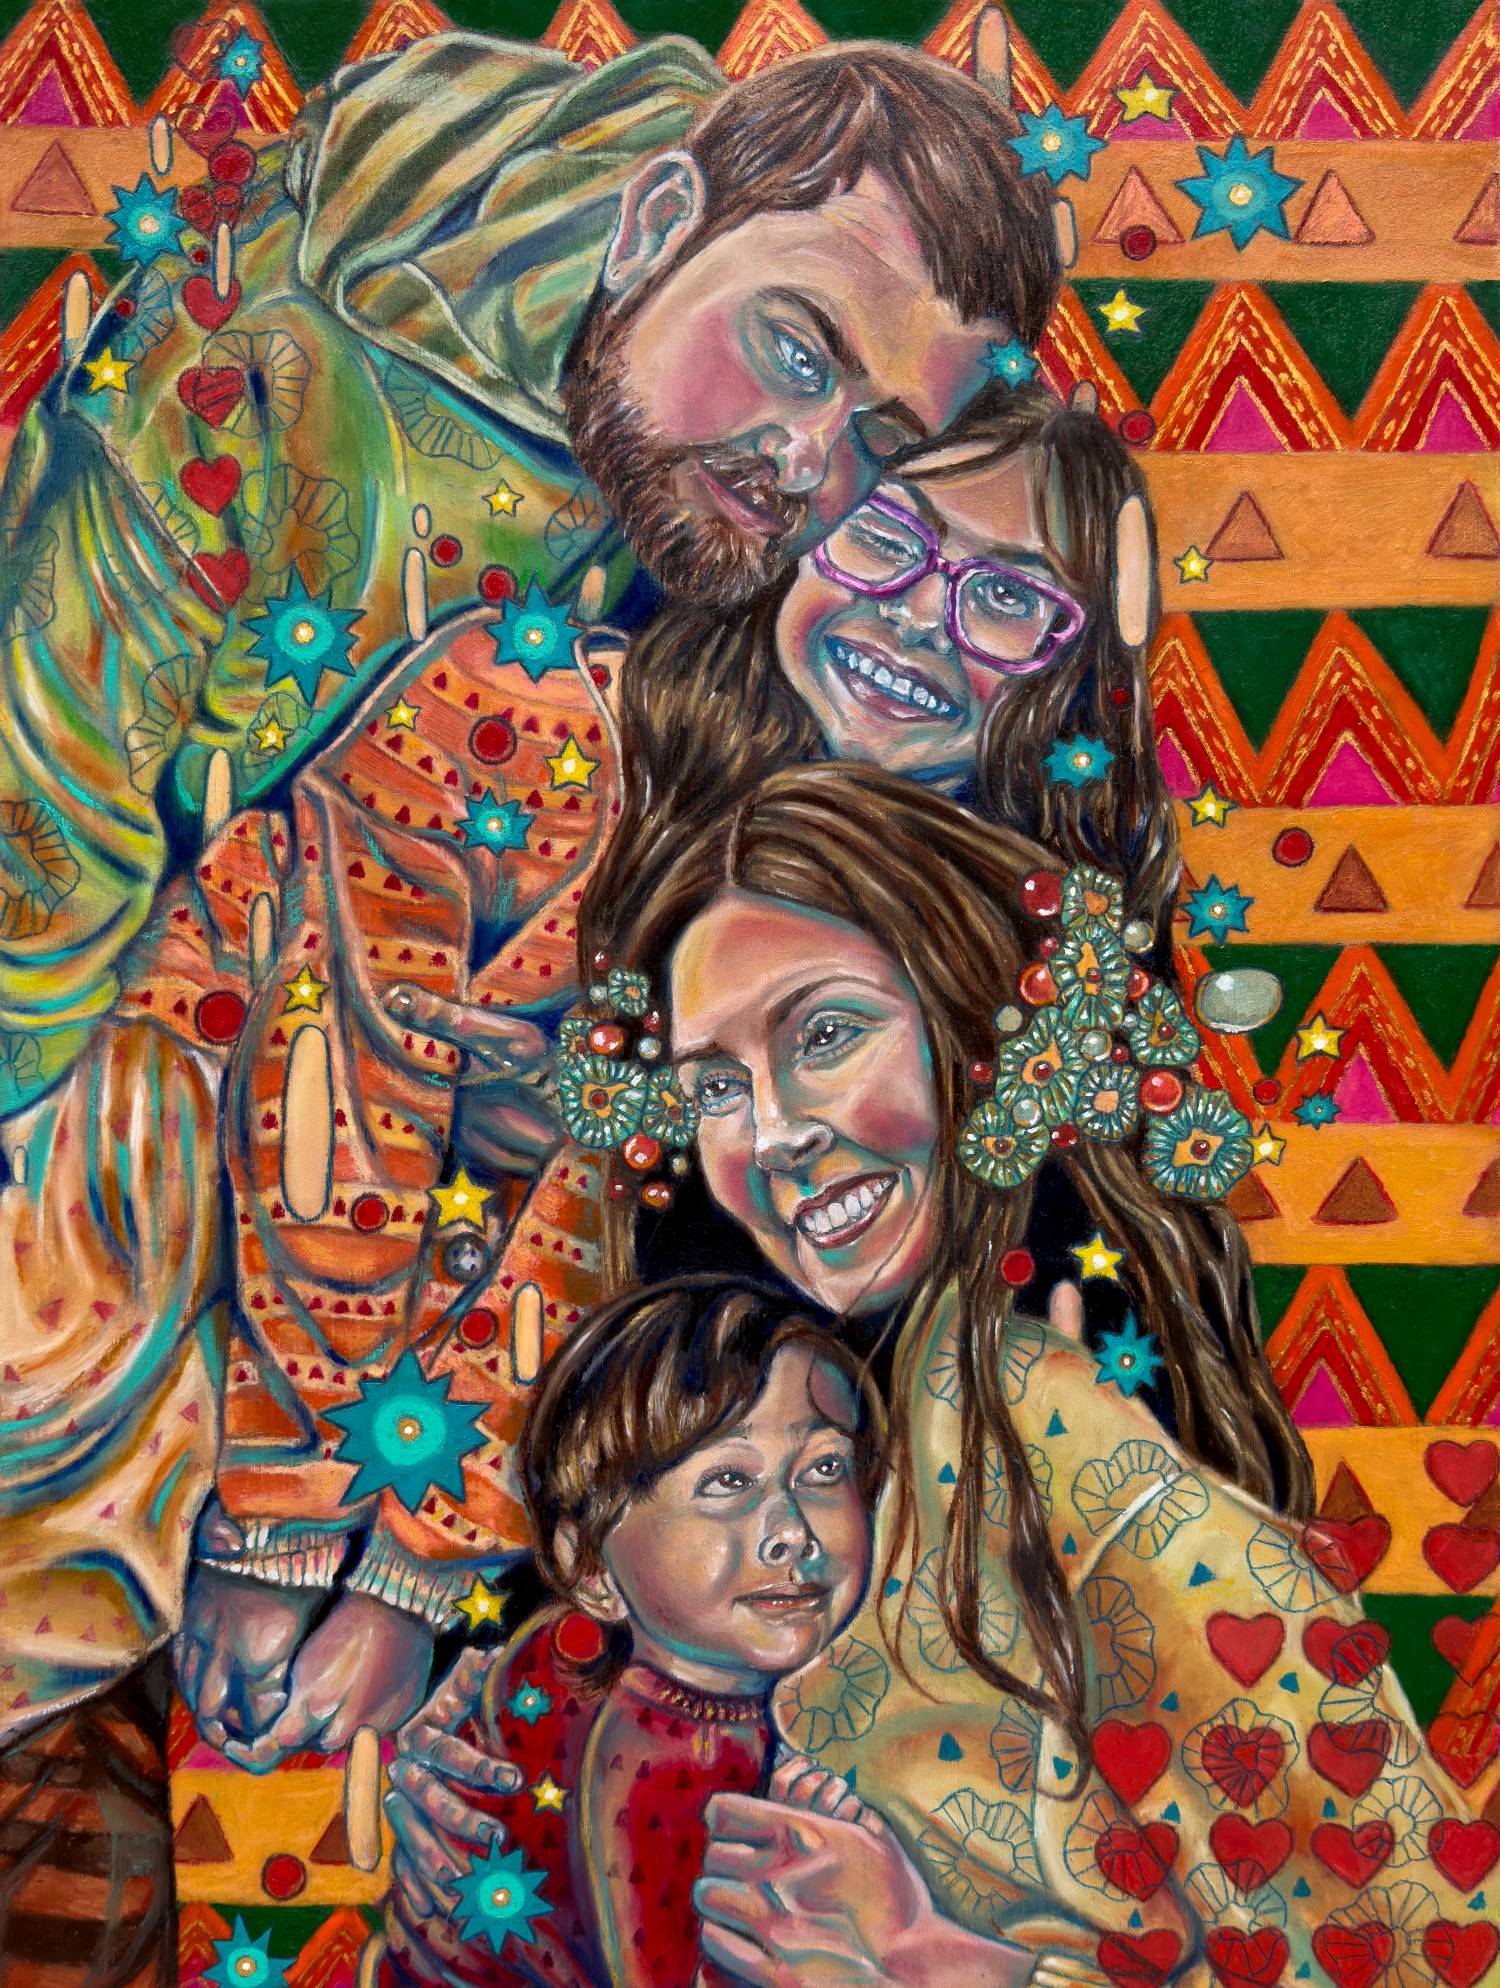 Danielle Renee Whitehead's piece, "Familia," which features two parents and two children with bright, geometric shapes surrounding them.